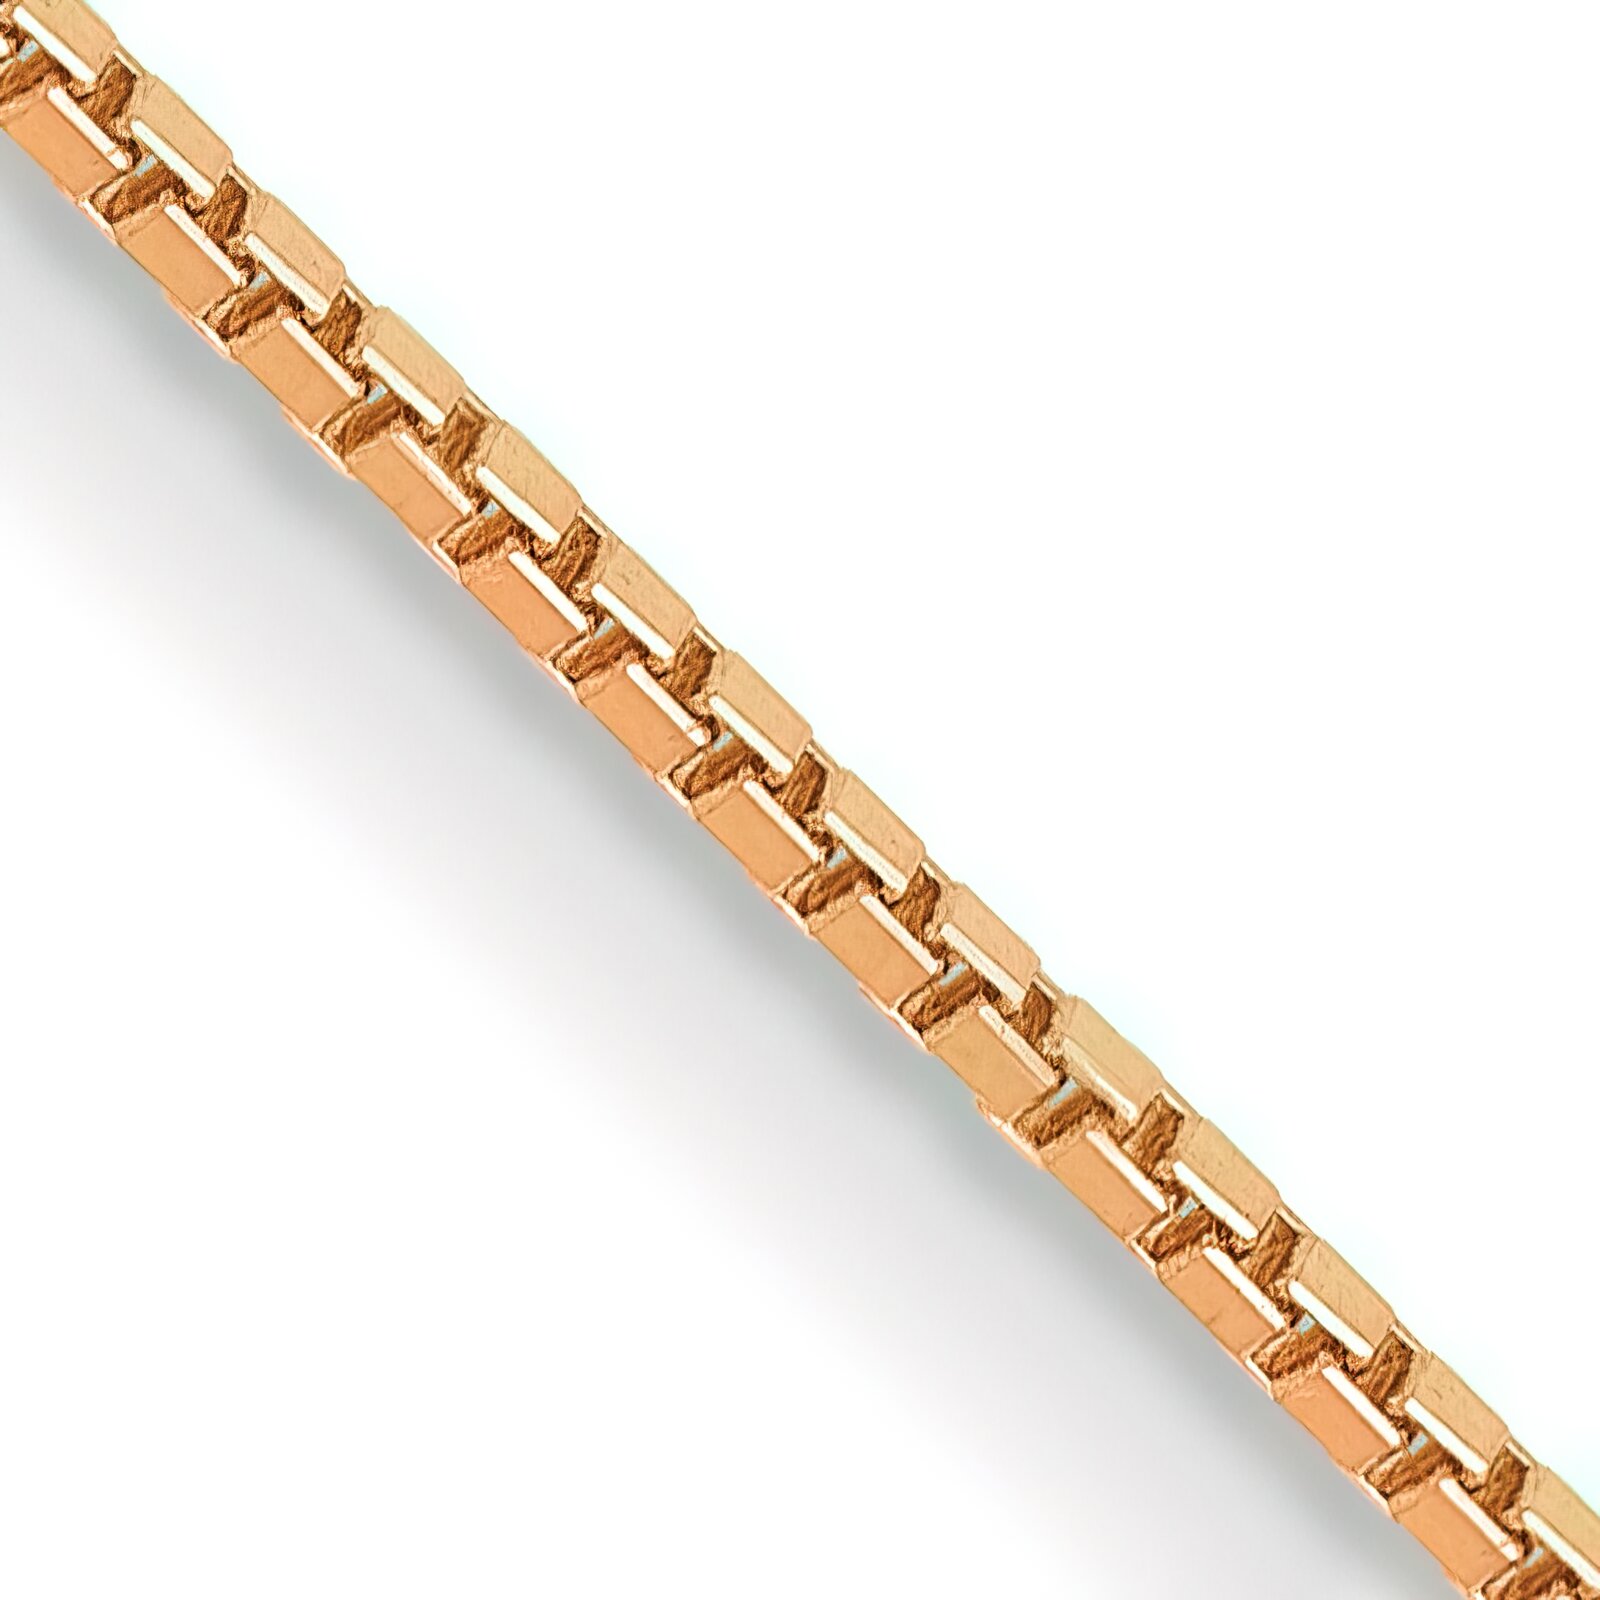 Findingking 14K Rose Gold .8mm Box Link Chain Necklace Jewelry 18"